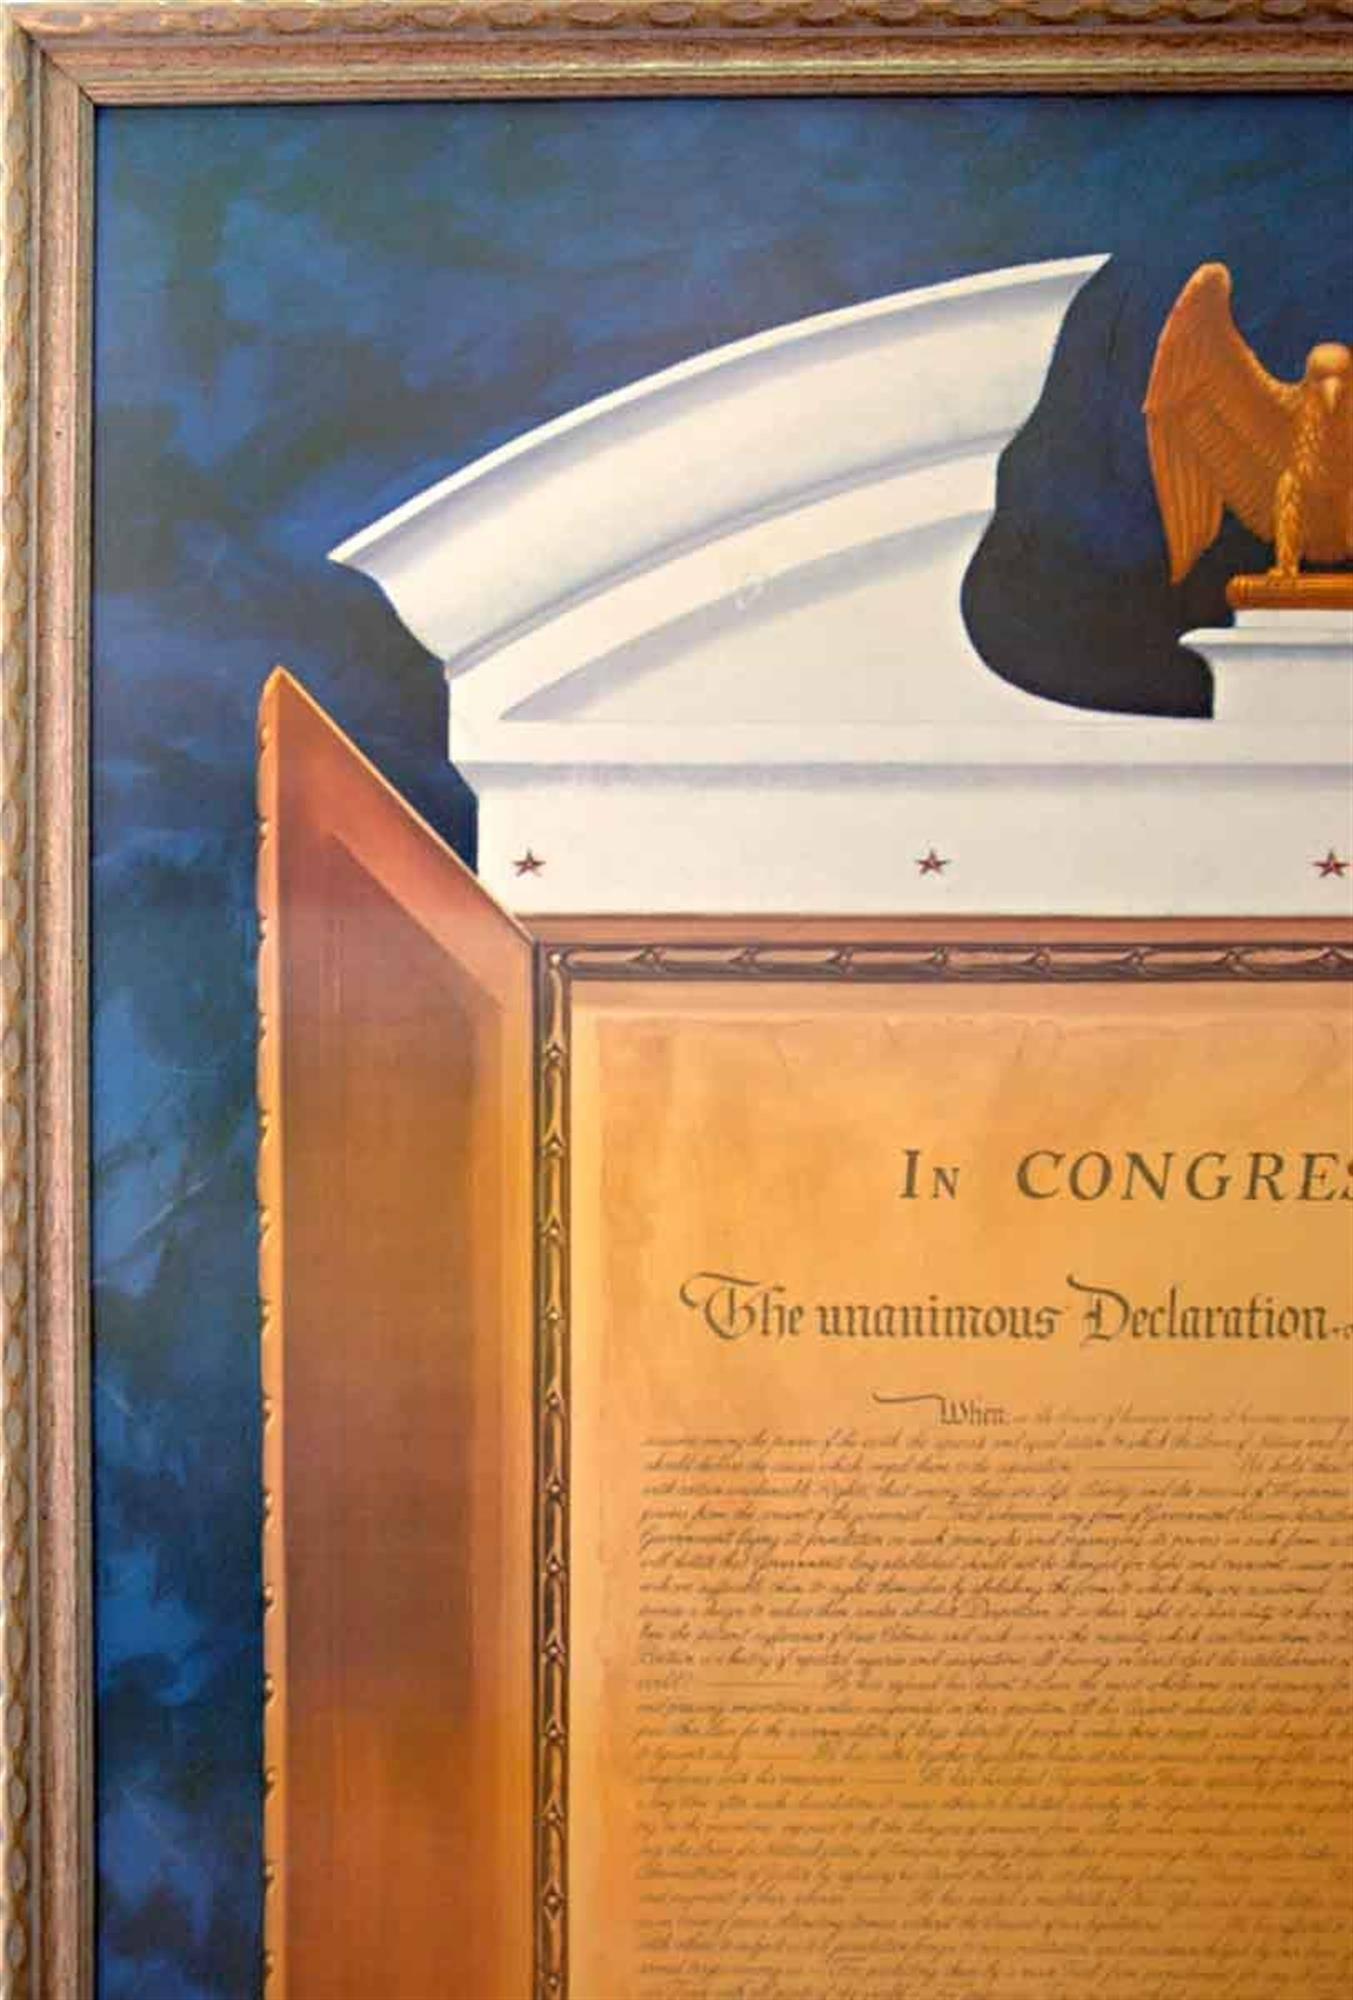 One of a kind framed lithograph of Thomas Jefferson’s 'Declaration of Independence.' It was made and presented to the city of Philadelphia as a gift from 'ACME Markets' in 1961. The timeless document appears to be set within a white monument, which